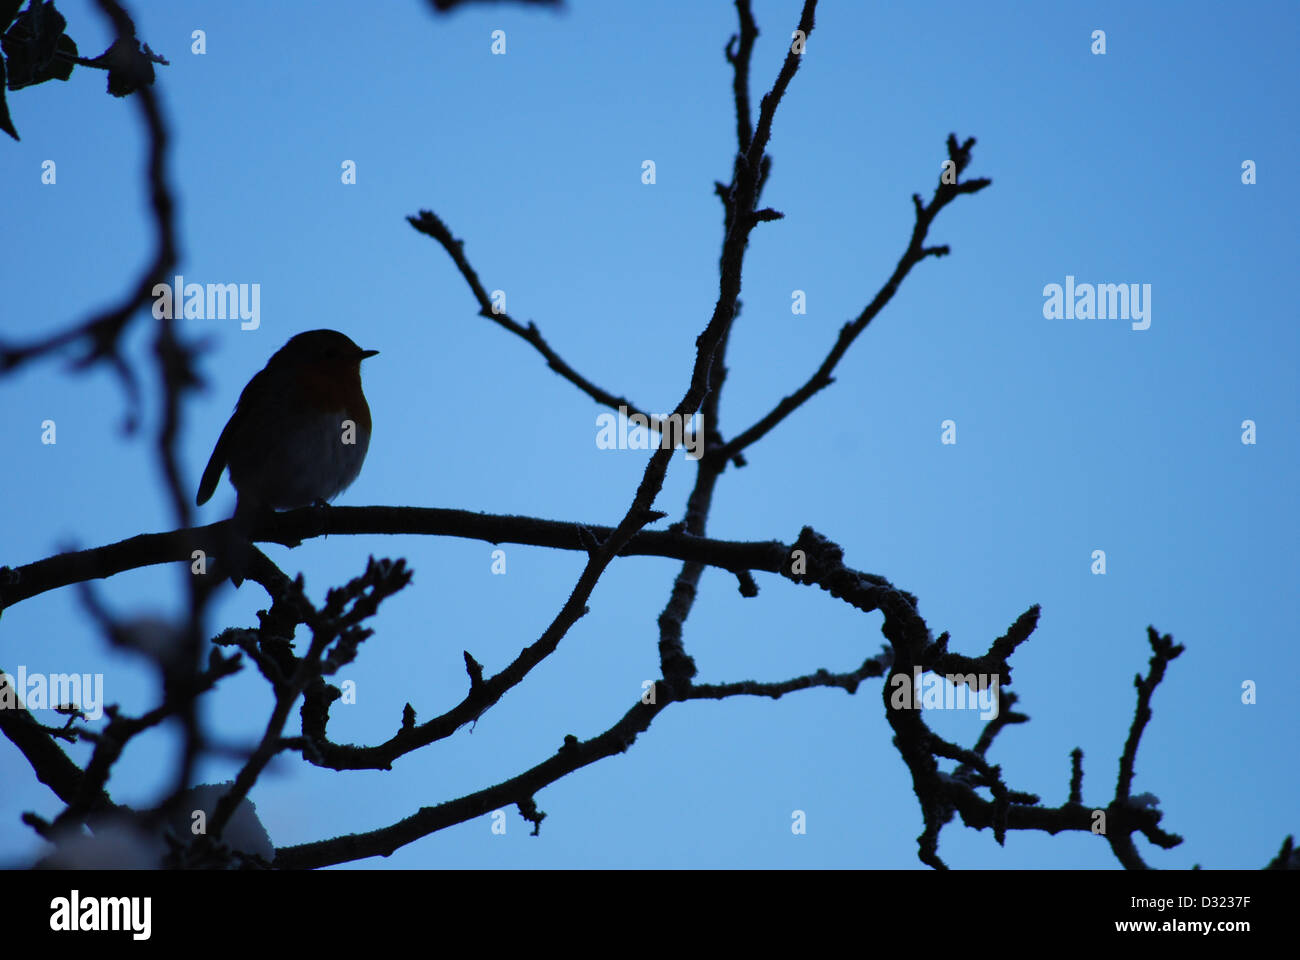 A robin bird on a branch covered in snow, a silhouette shadow against a blue sky background on a tree growing new leaves looking Stock Photo